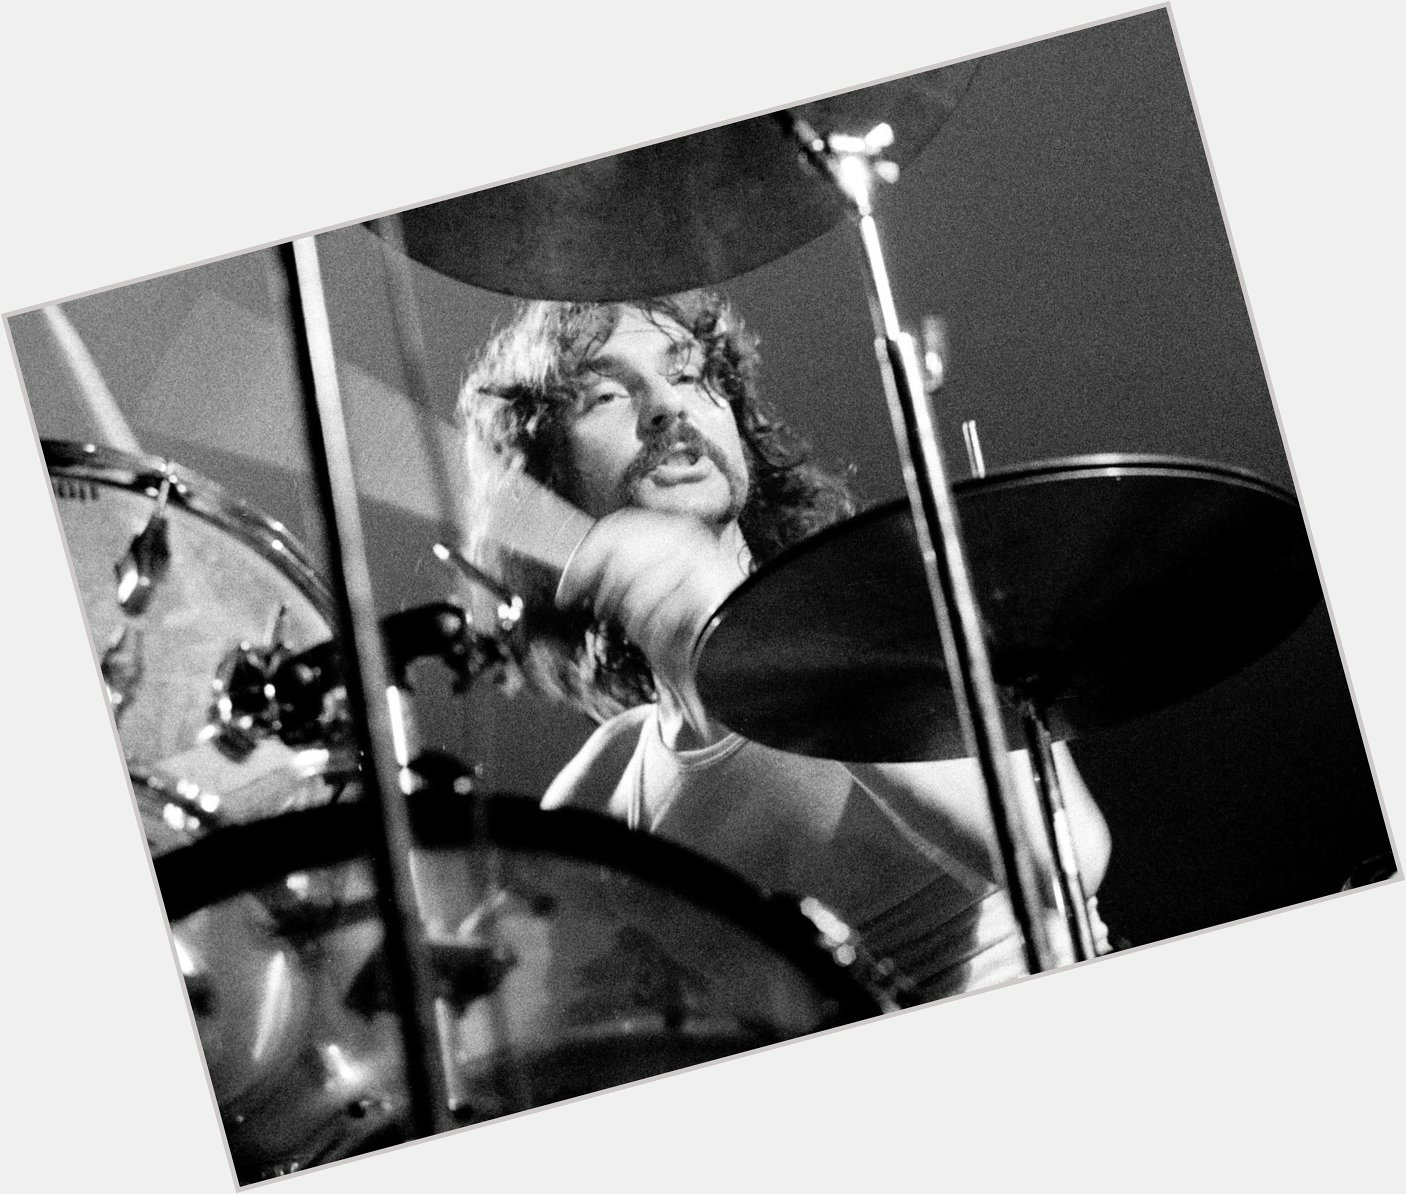 Happy 78th Birthday today to Nick Mason, drummer/percussionist of PINK FLOYD 1-27-1944      